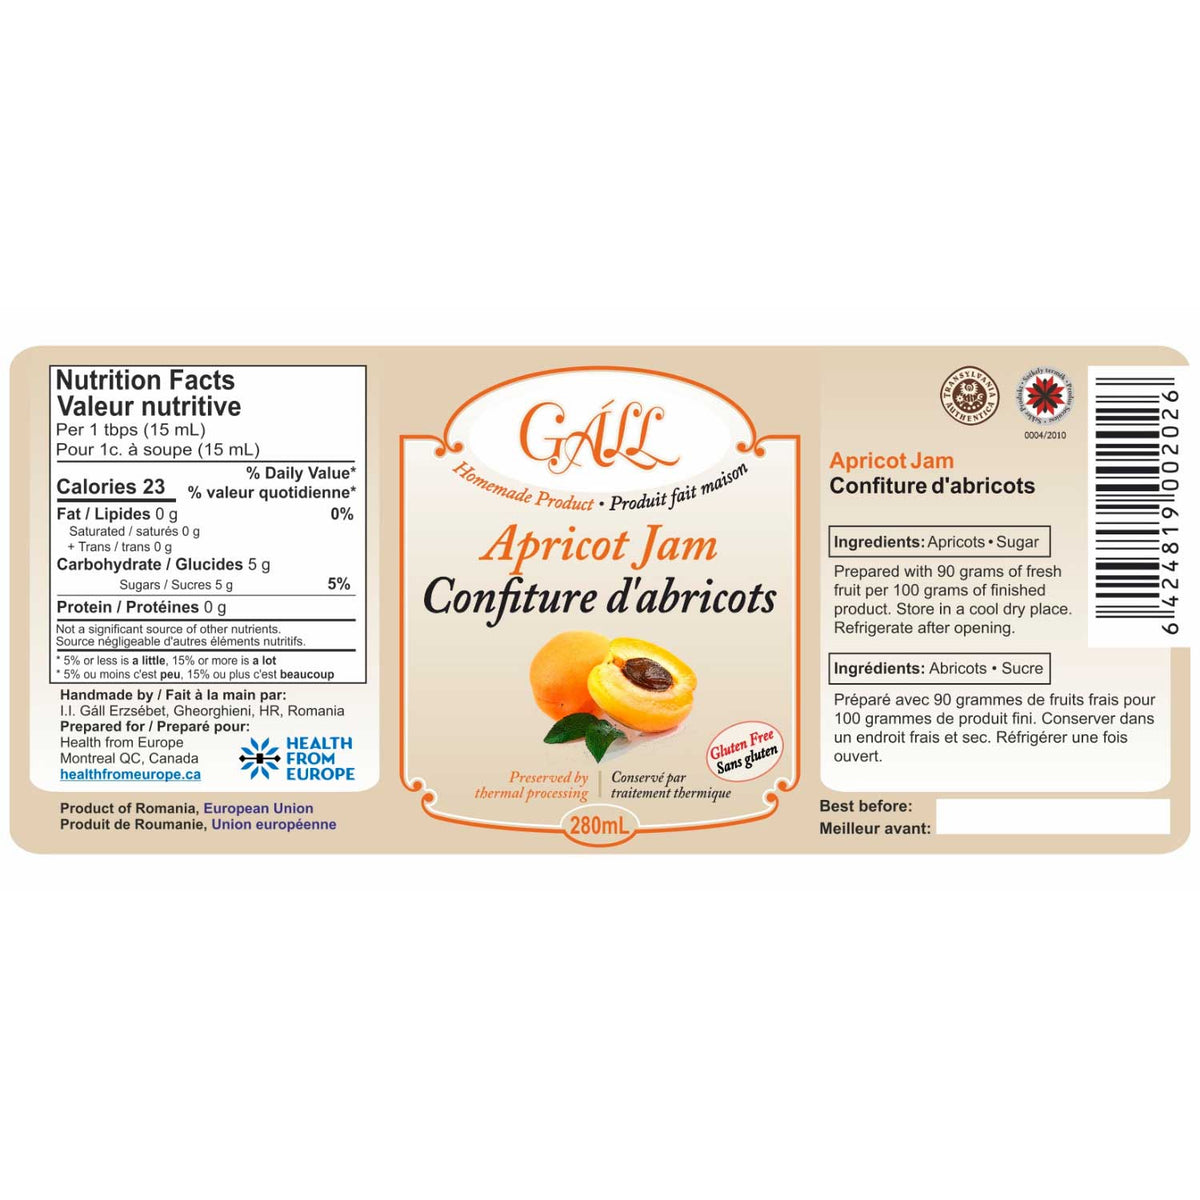 Artisanal Apricot Jam label Health from Europe